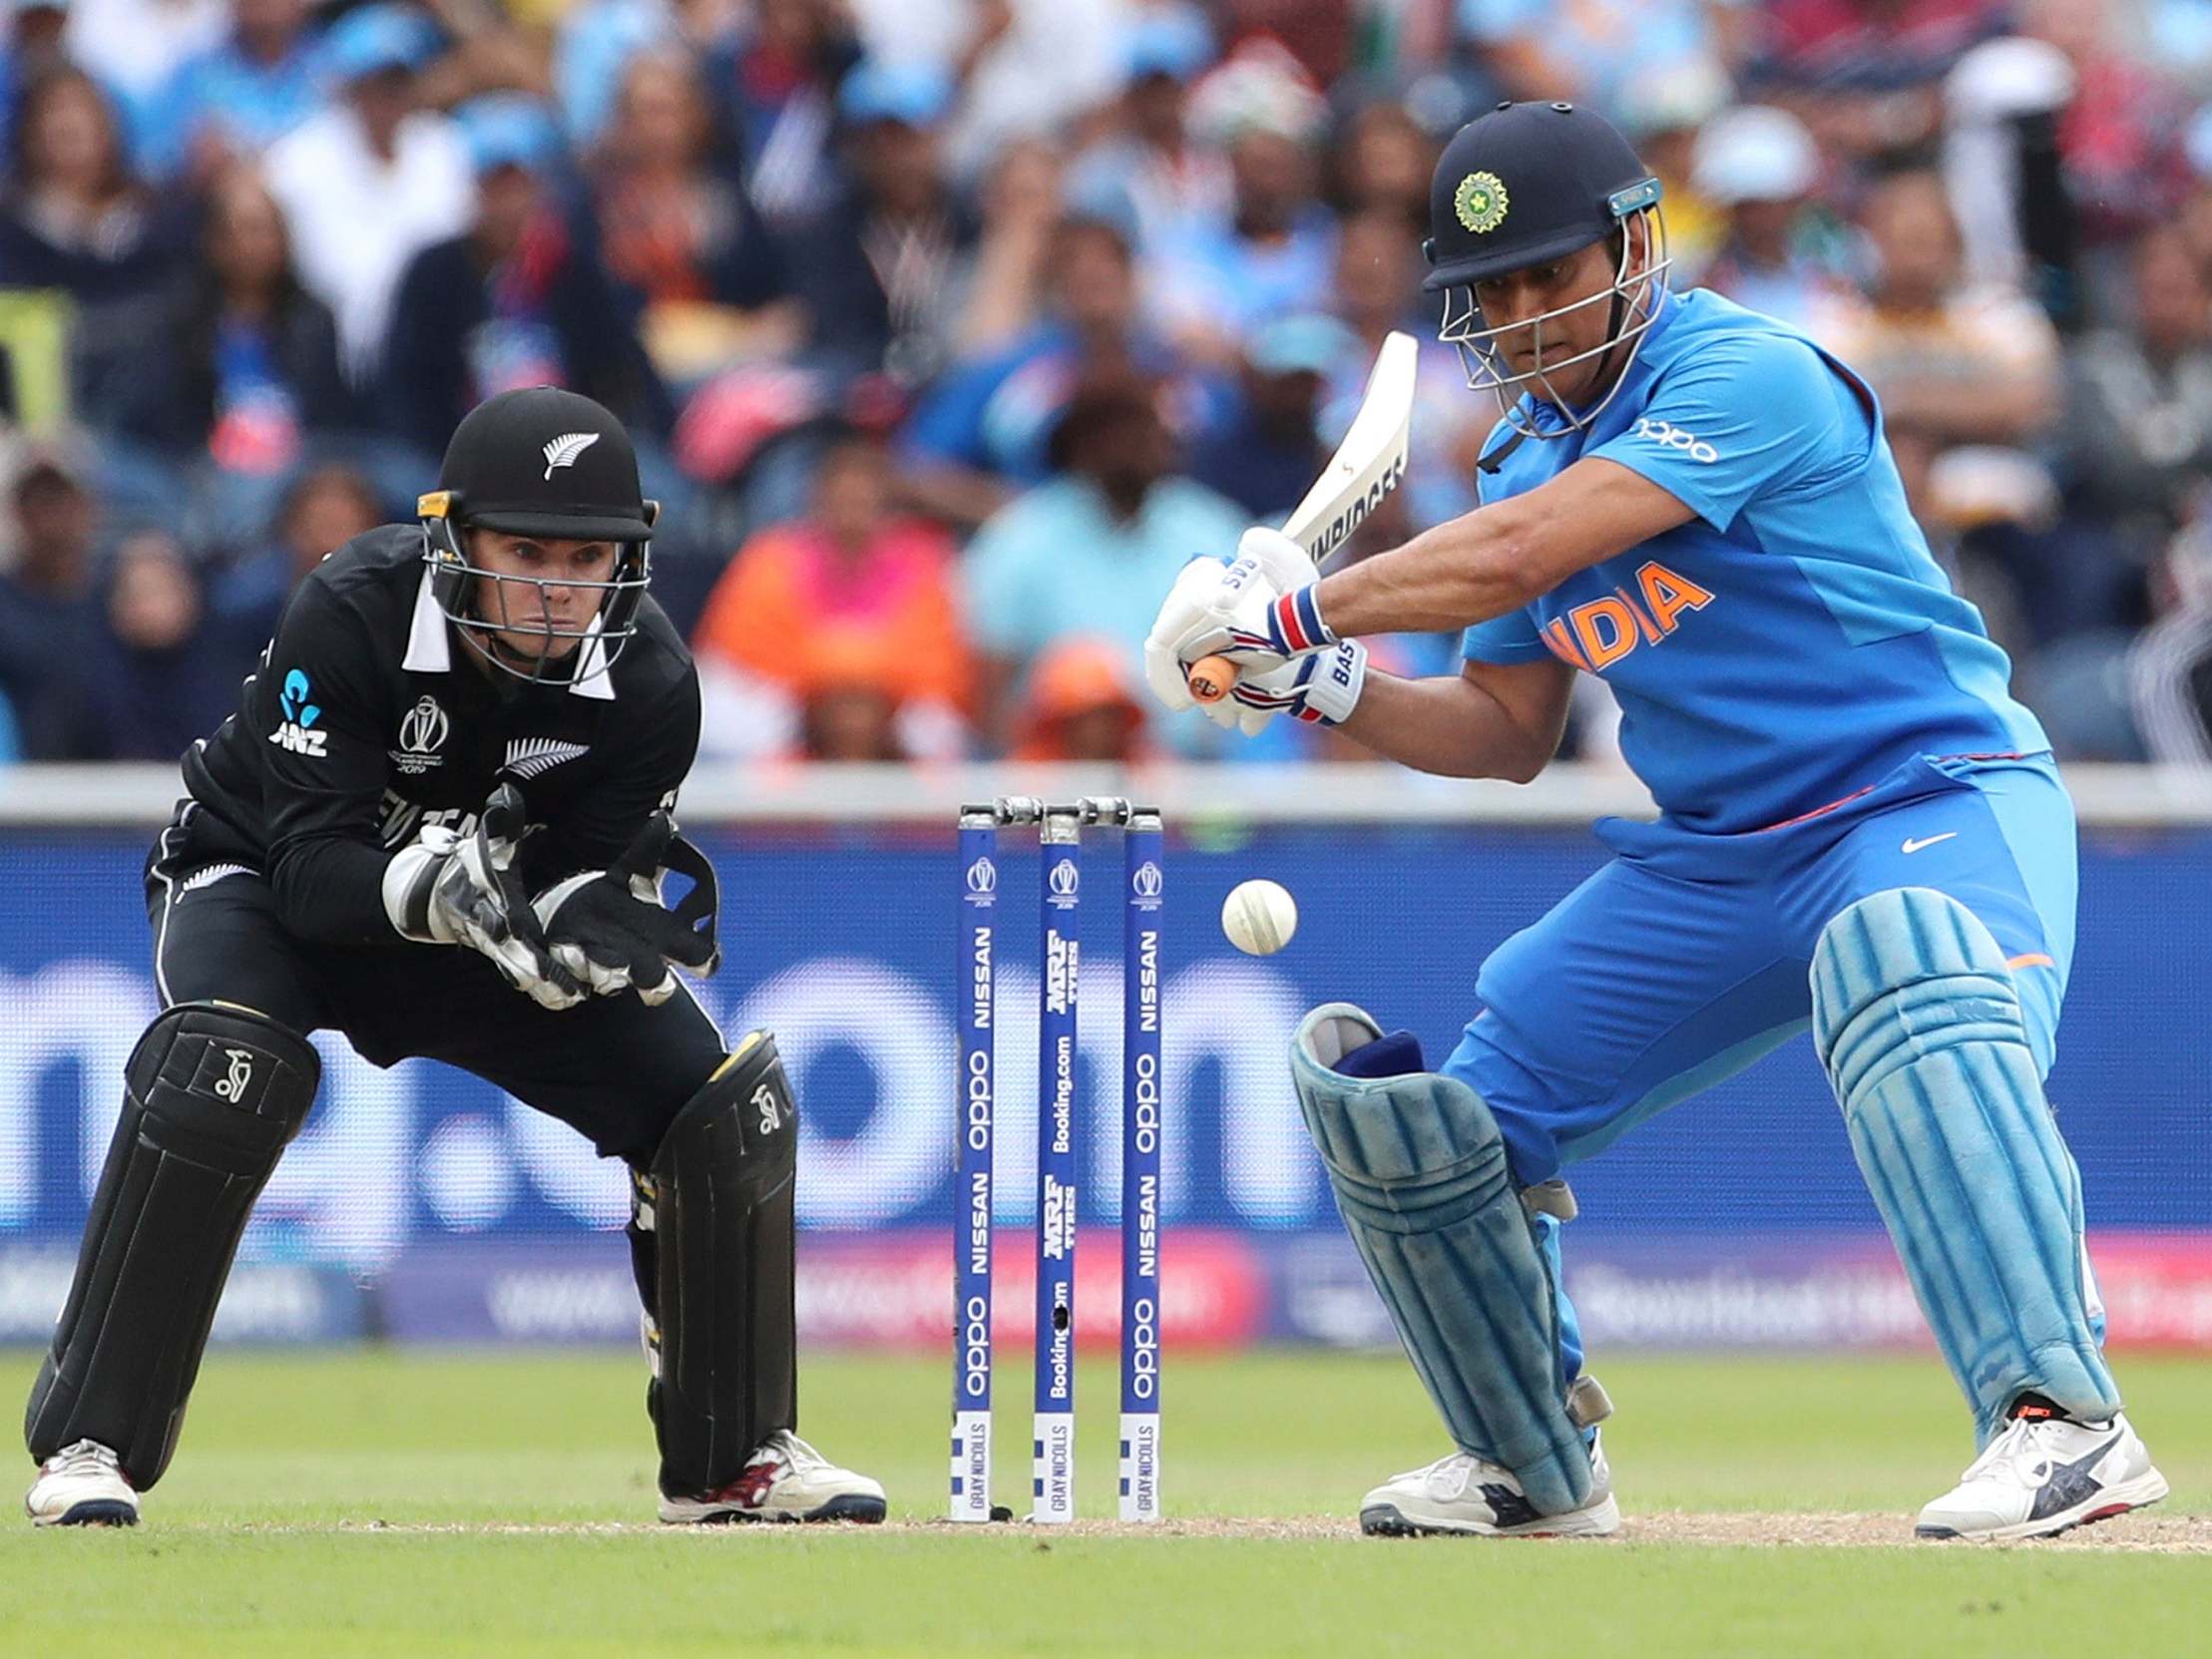 India vs New Zealand LIVE World Cup 2019 score: Wickets fall as semi-final goes down ...